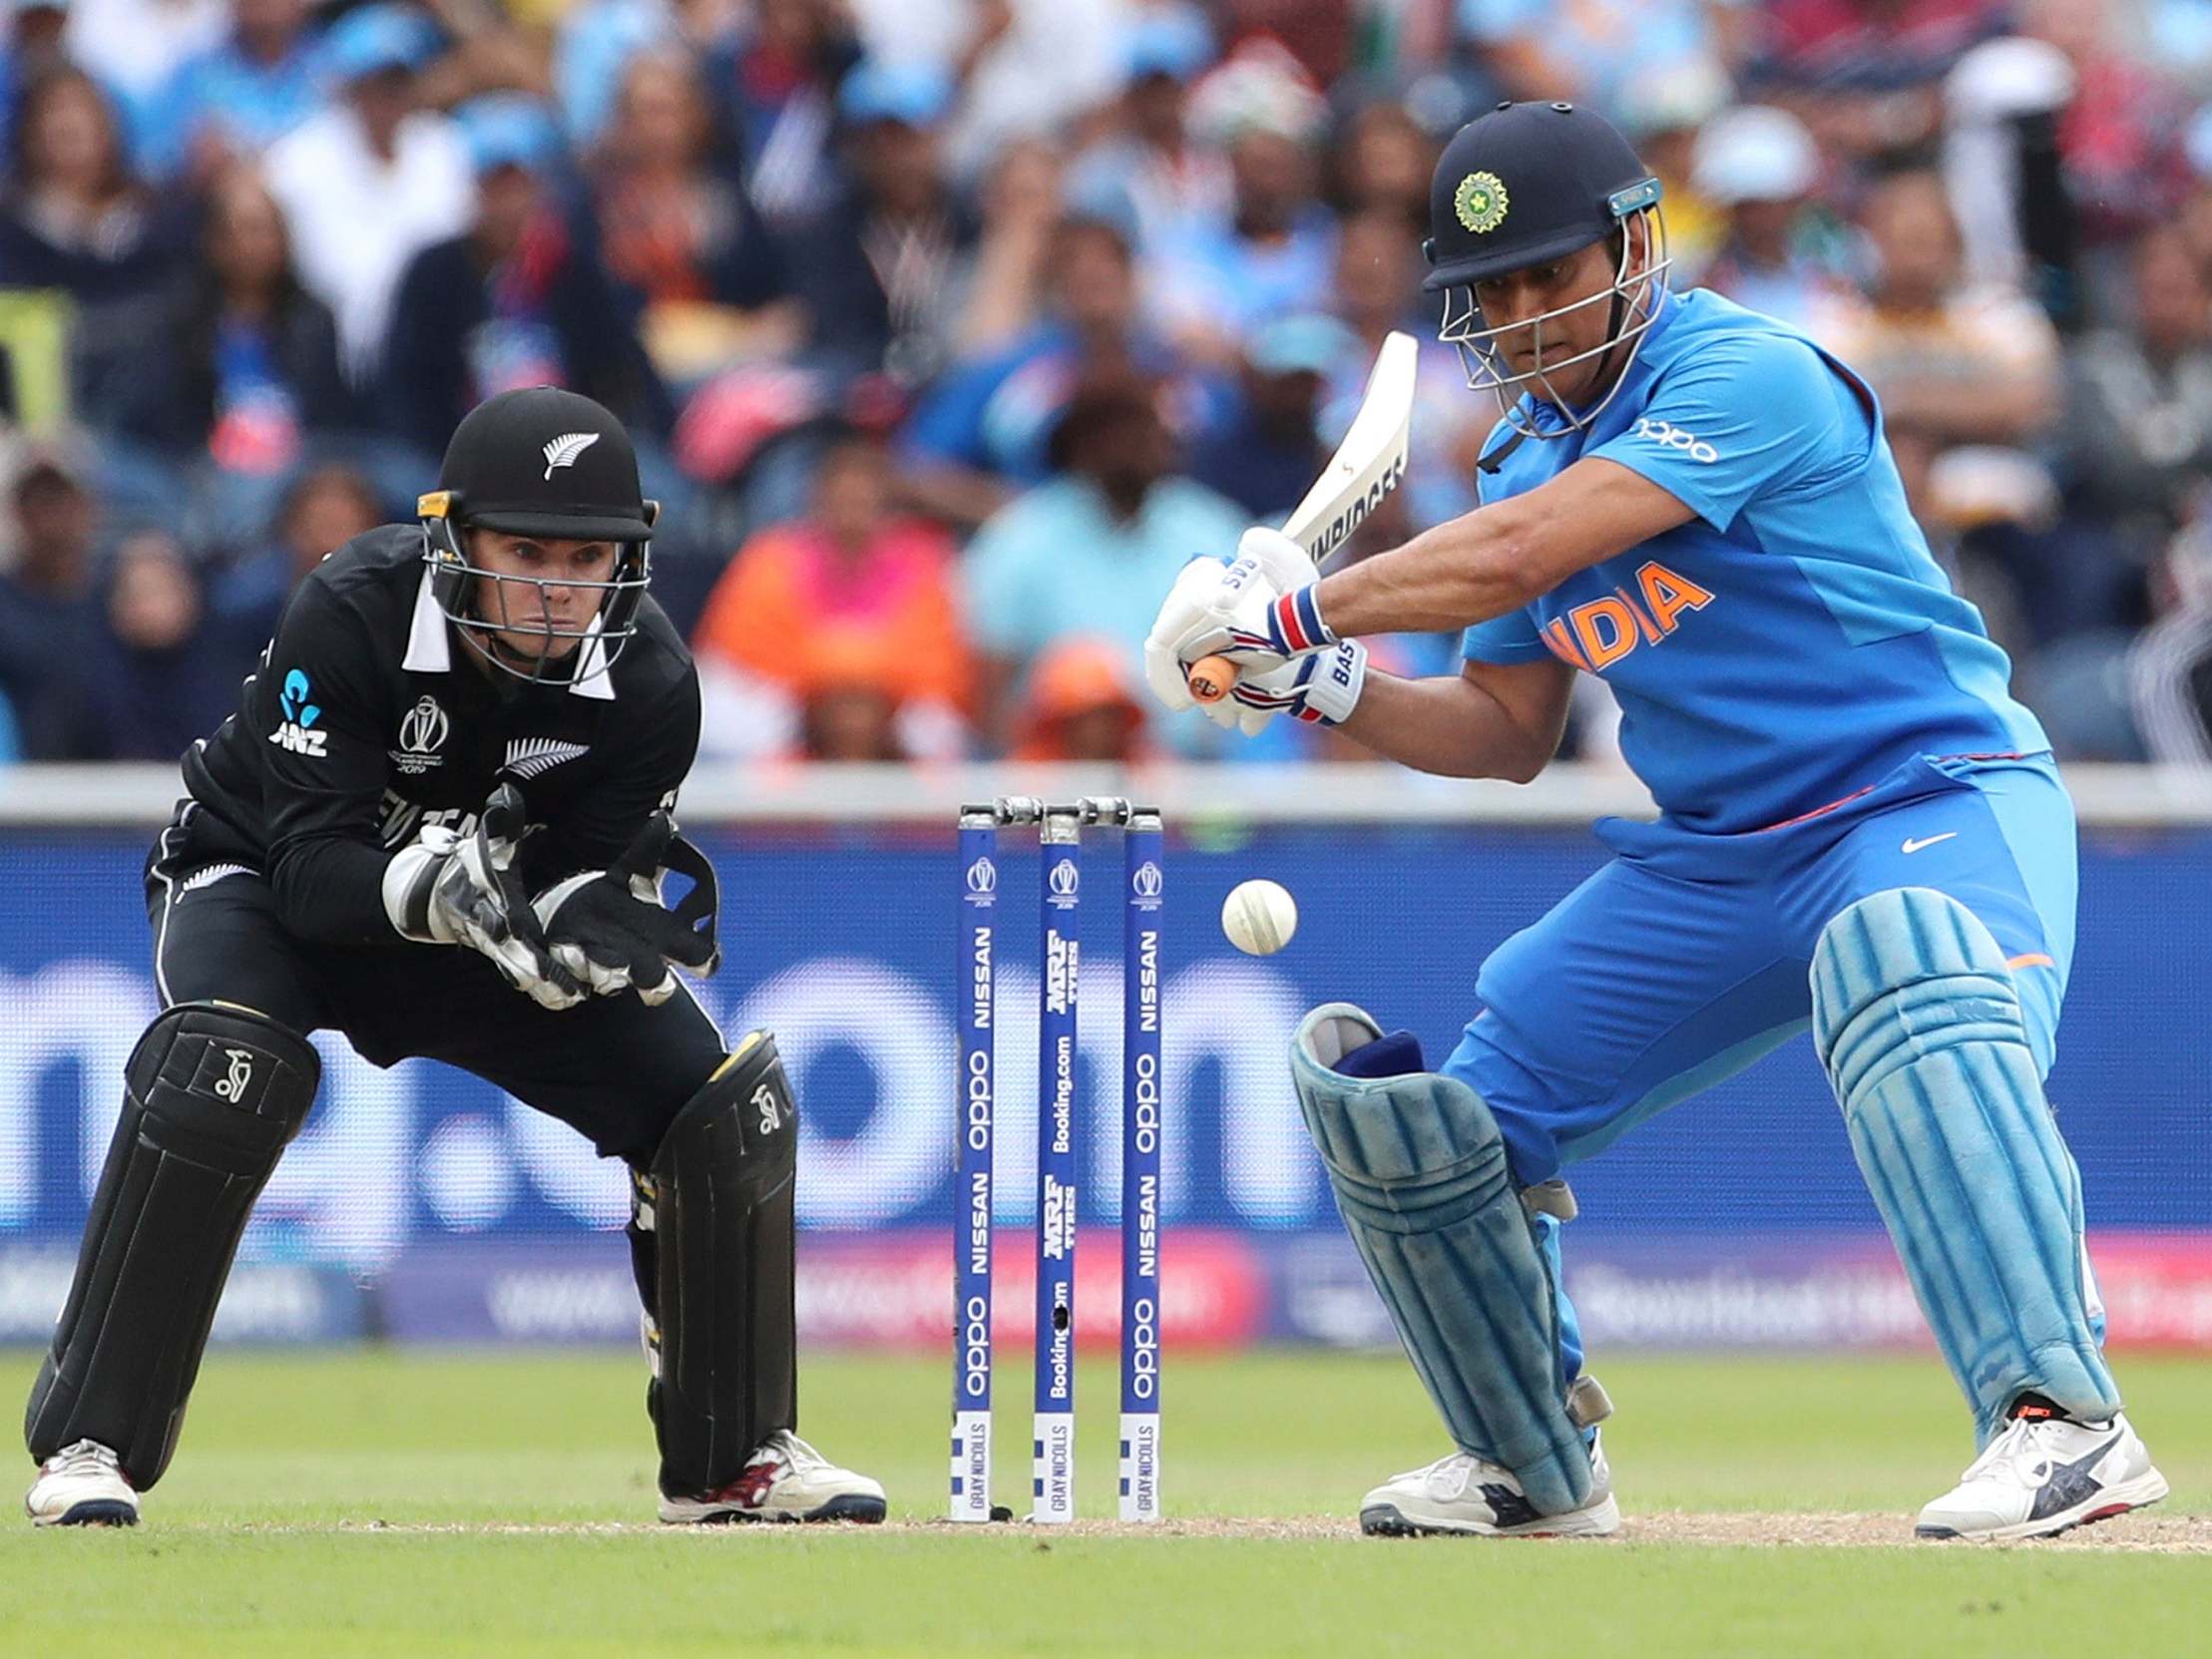 India vs New Zealand LIVE World Cup 2019 score: Wickets fall as semi-final goes down ...